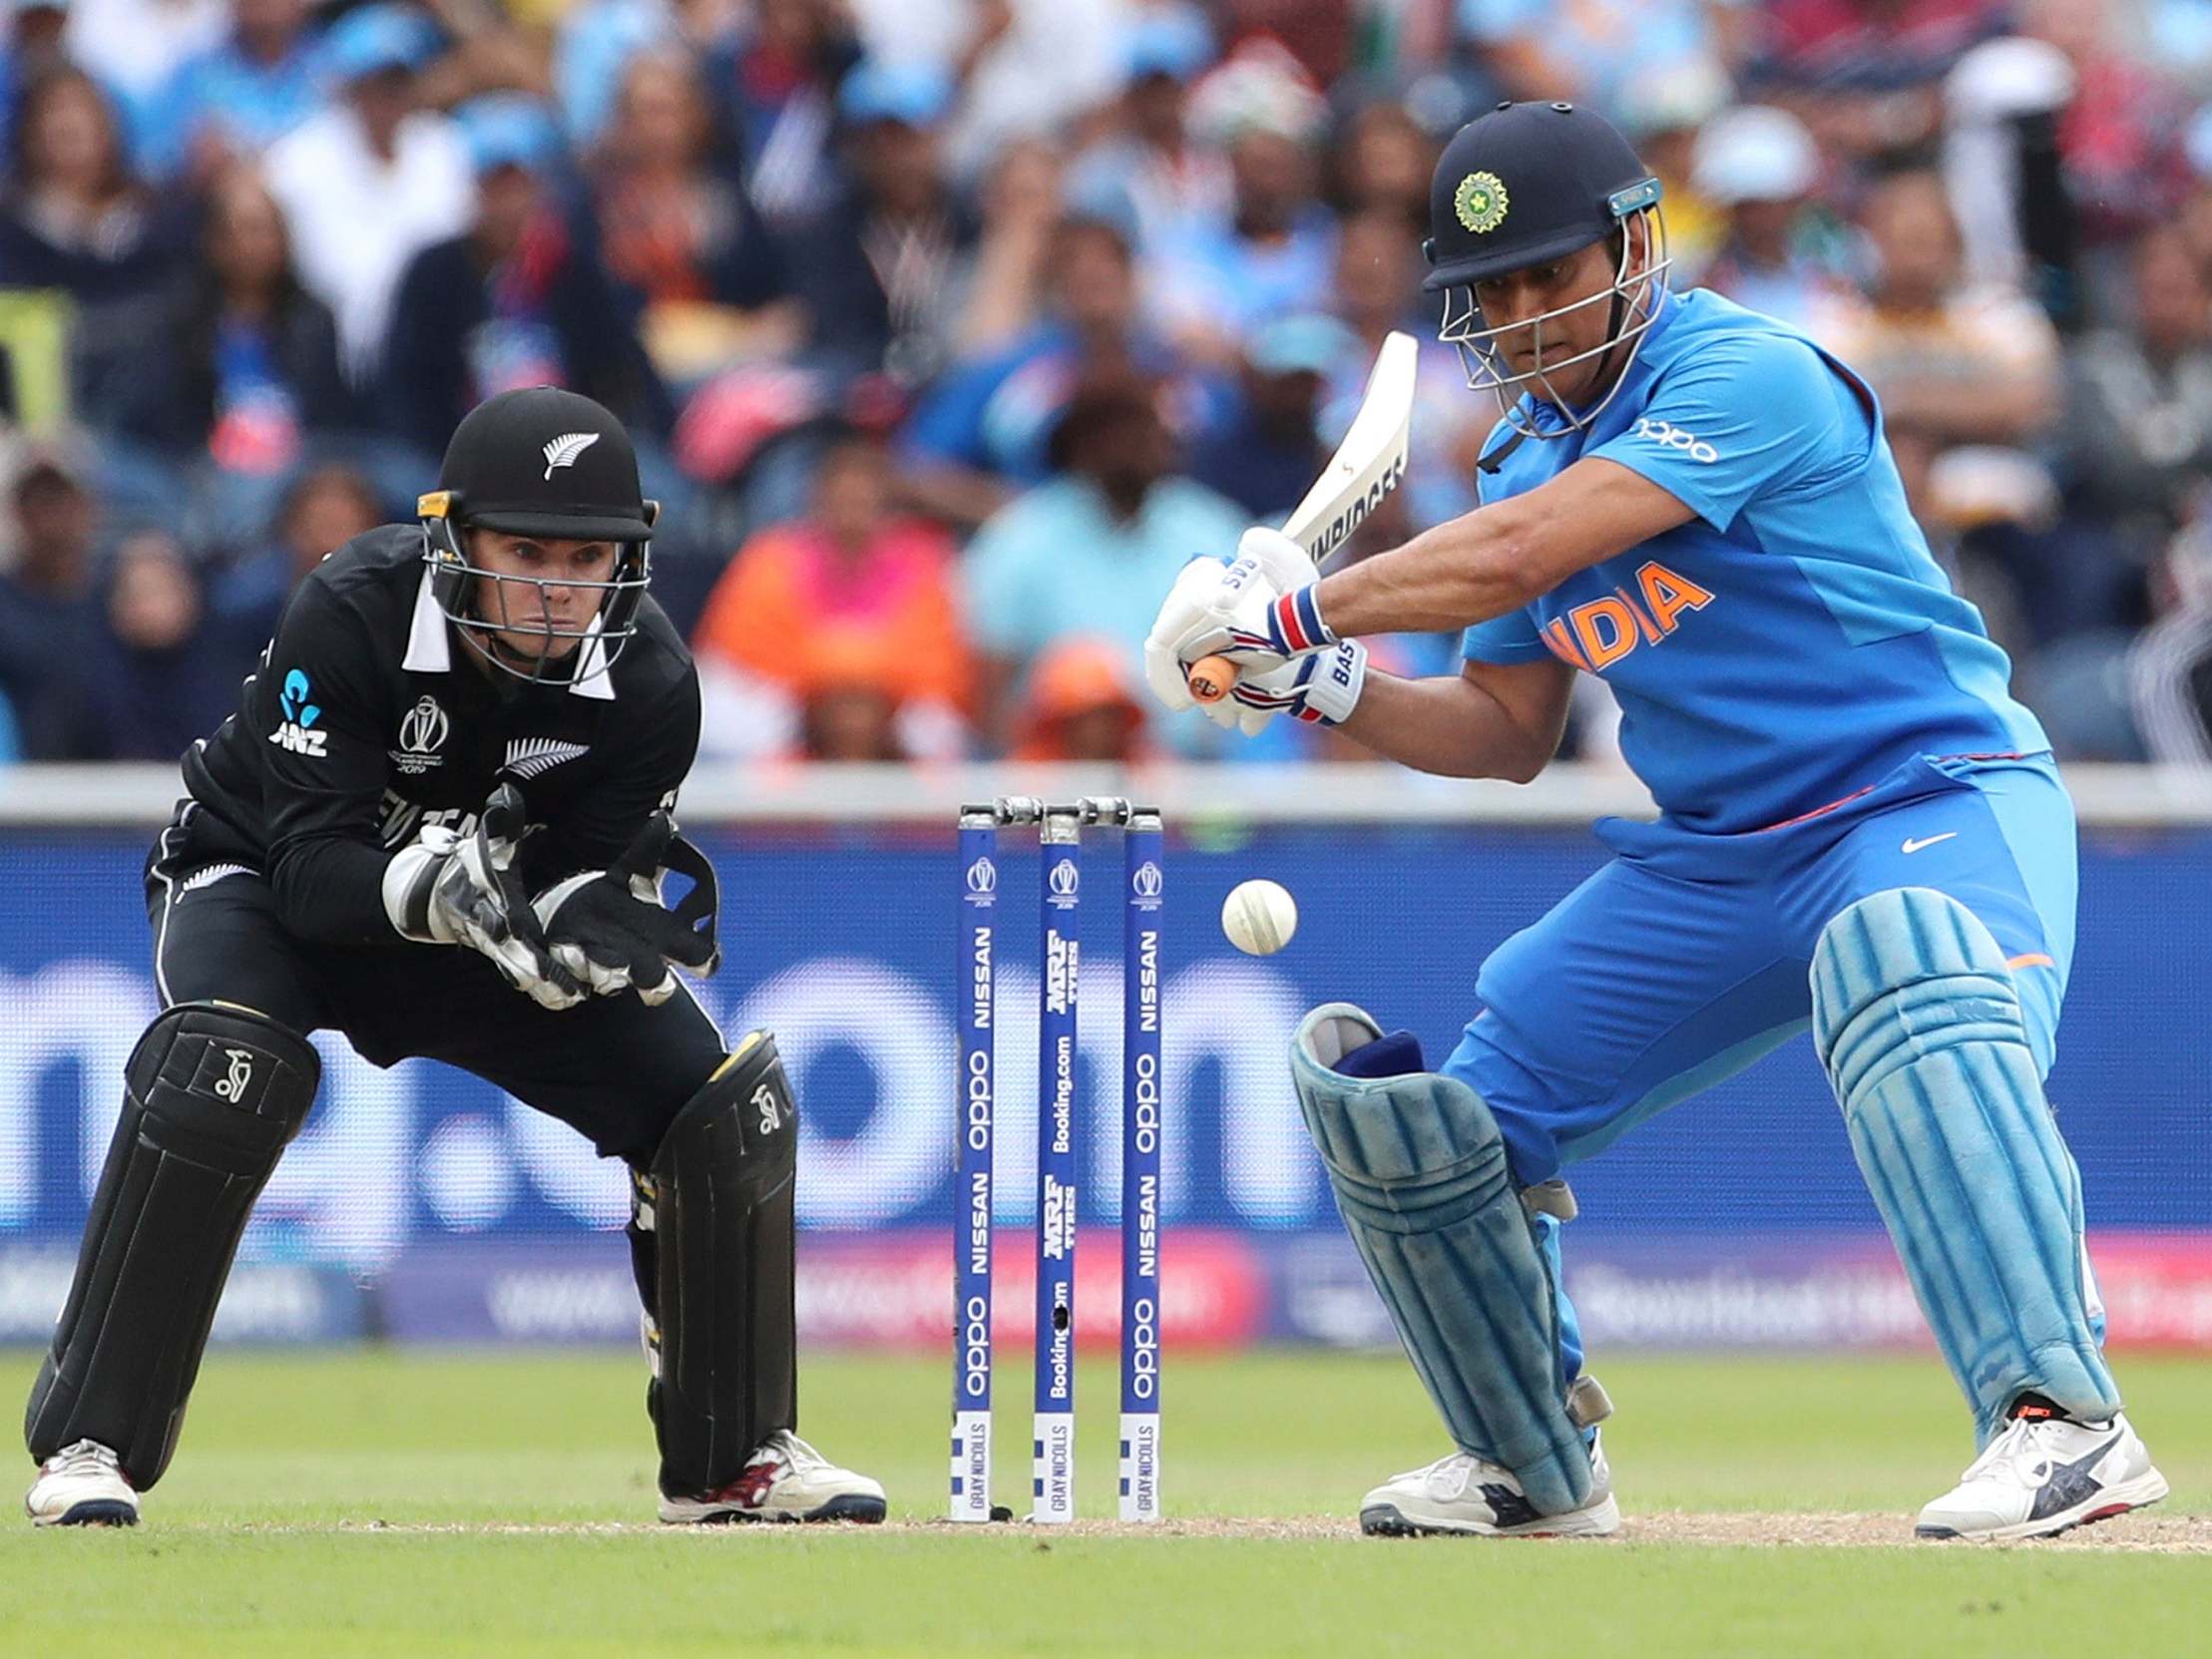 India vs New Zealand LIVE World Cup 2019 score: Wickets fall as semi-final goes down ...